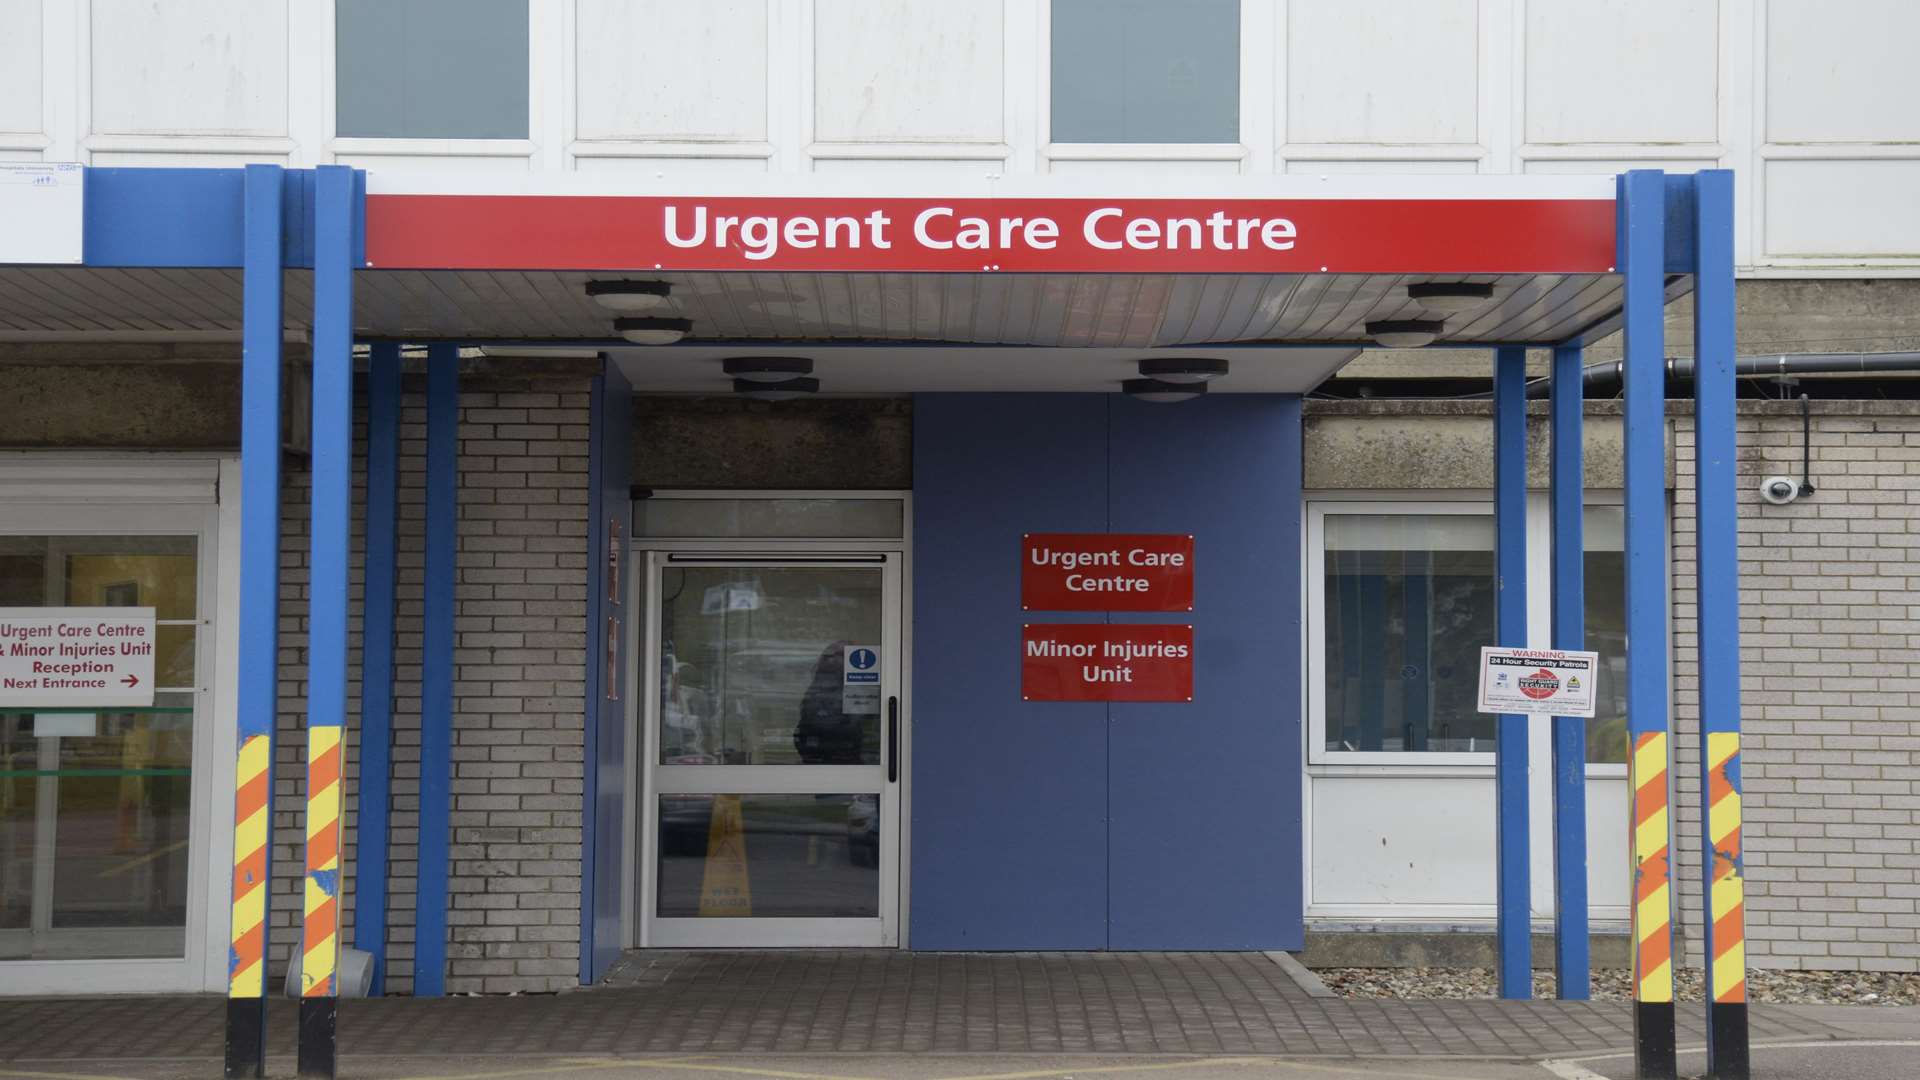 The Urgent Care Centre at the Kent & Canterbury Hospital is risk of closure.